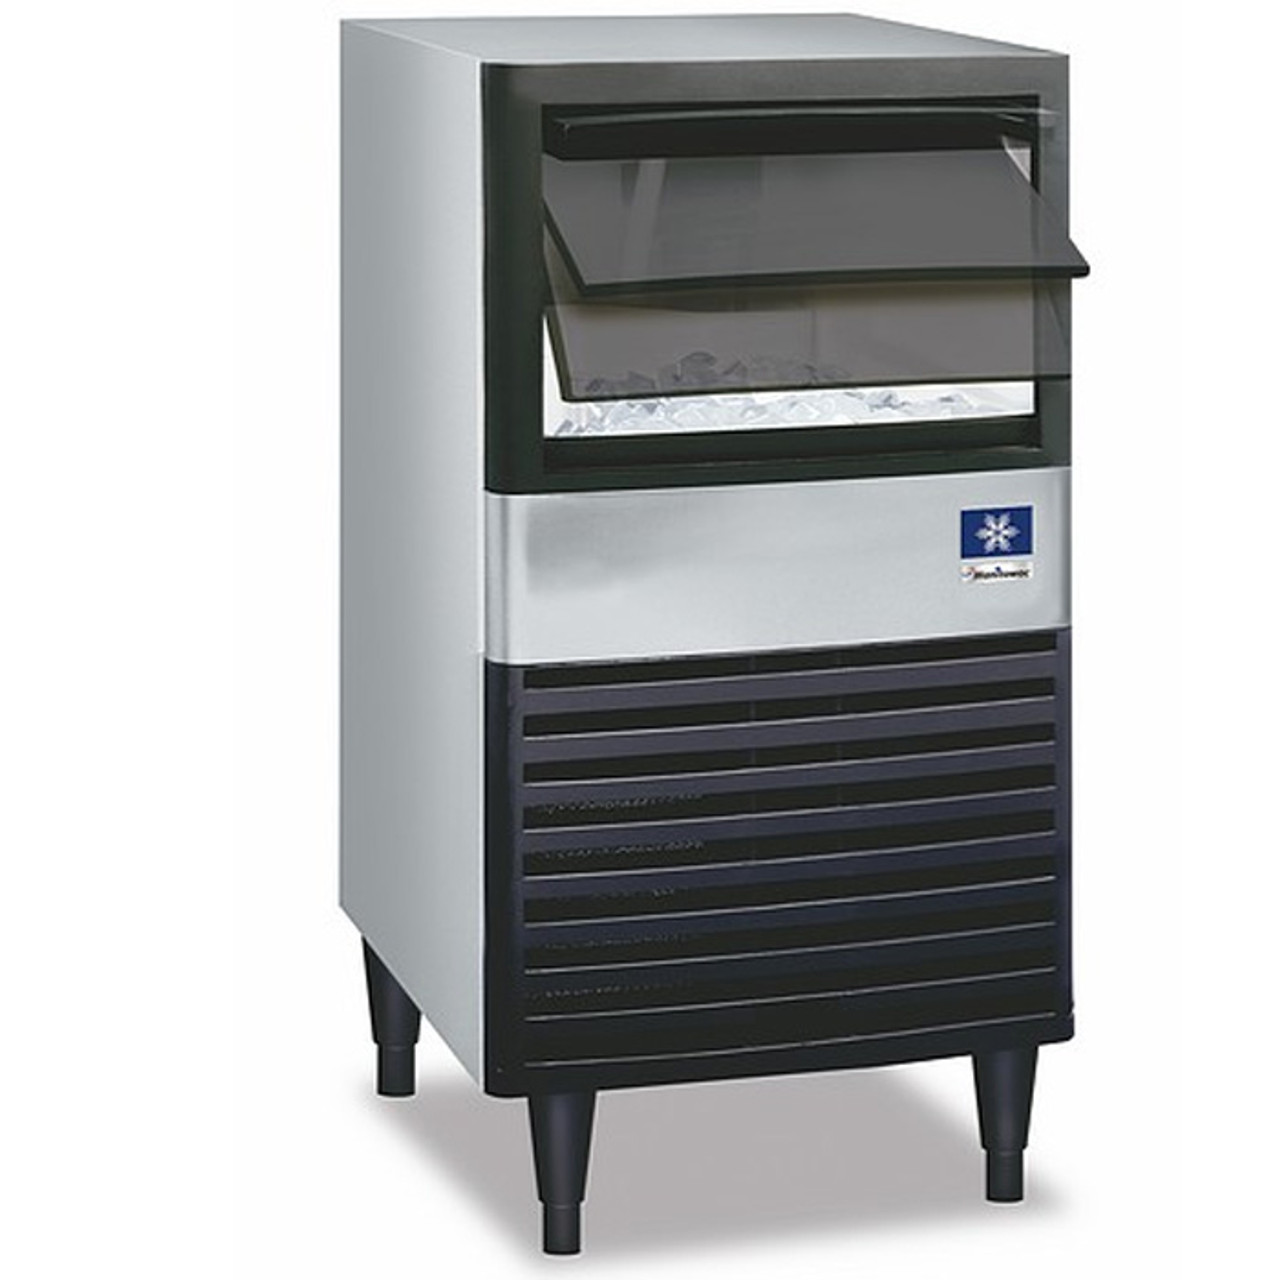 Manitowoc UDE-0080A - 110 lbs/day Under Counter Ice Maker